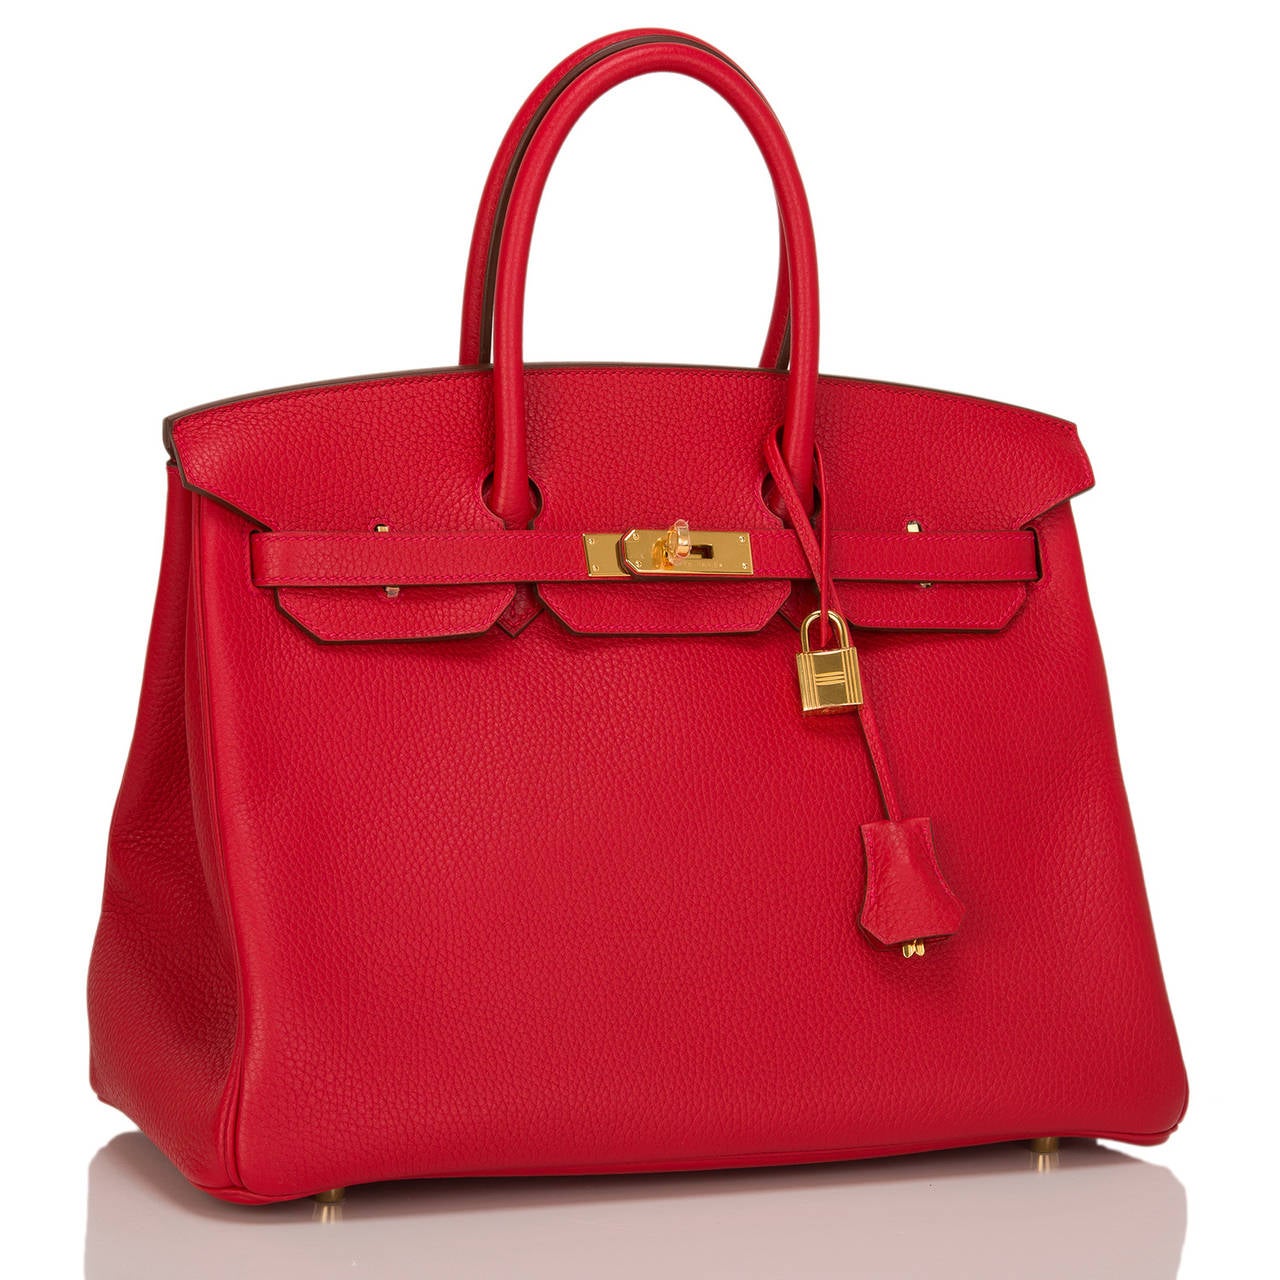 Hermes Rouge Casaque Birkin 35cm in clemence (baby bull) leather with gold hardware.

This Rouge Casaque Birkin features tonal stitching, front toggle closure, clochette with lock and two keys, and double rolled handles.

The interior is lined